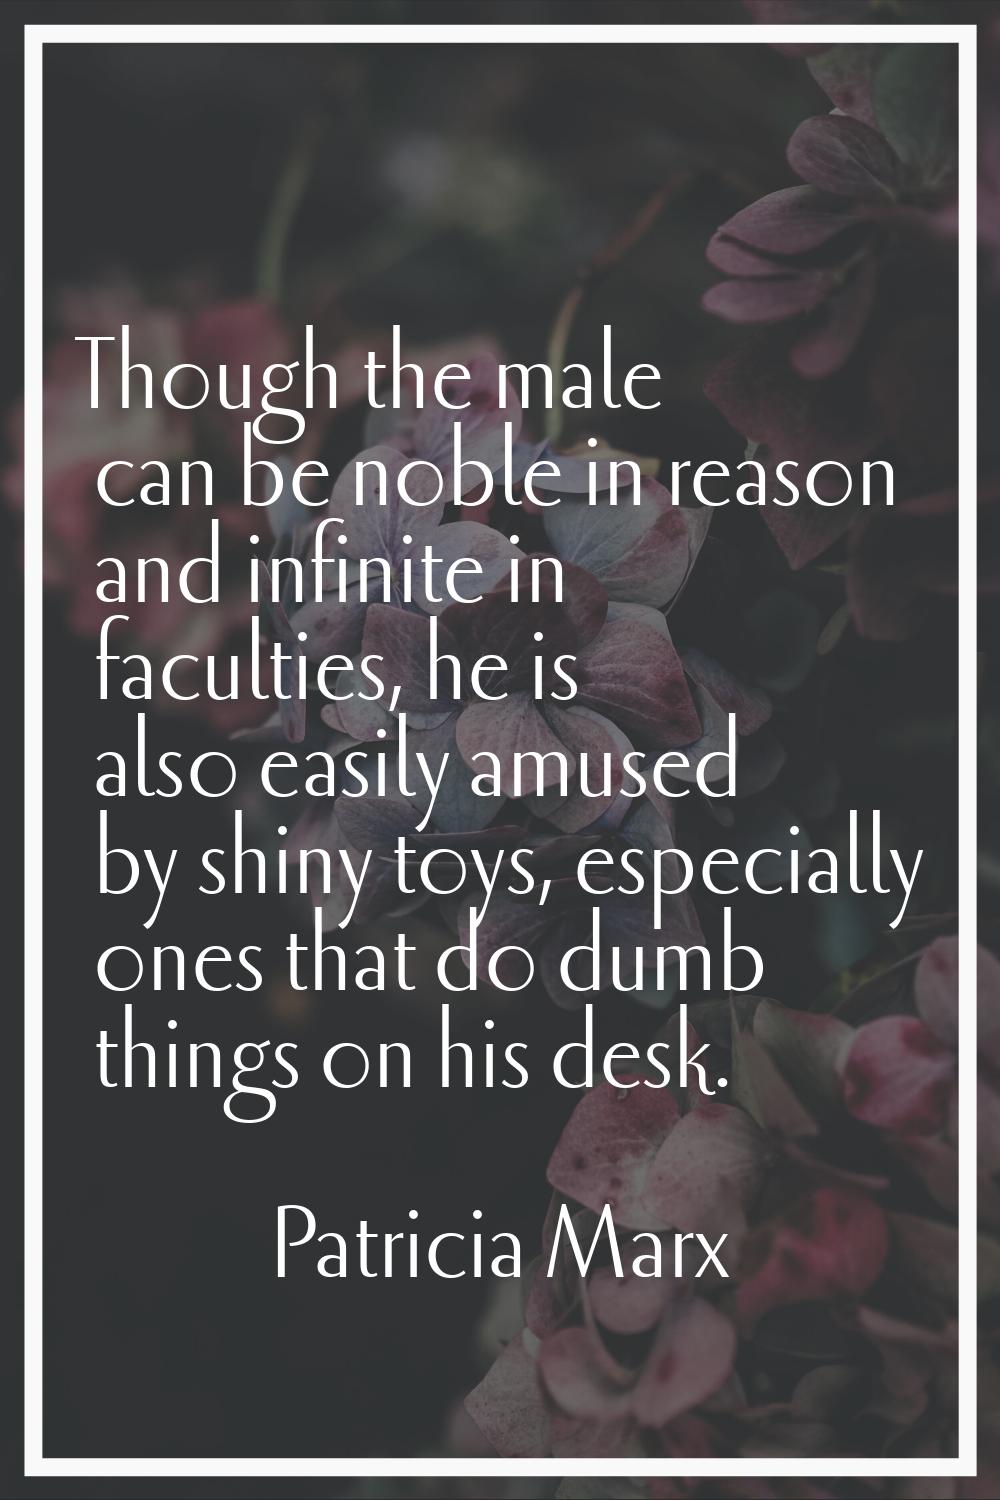 Though the male can be noble in reason and infinite in faculties, he is also easily amused by shiny